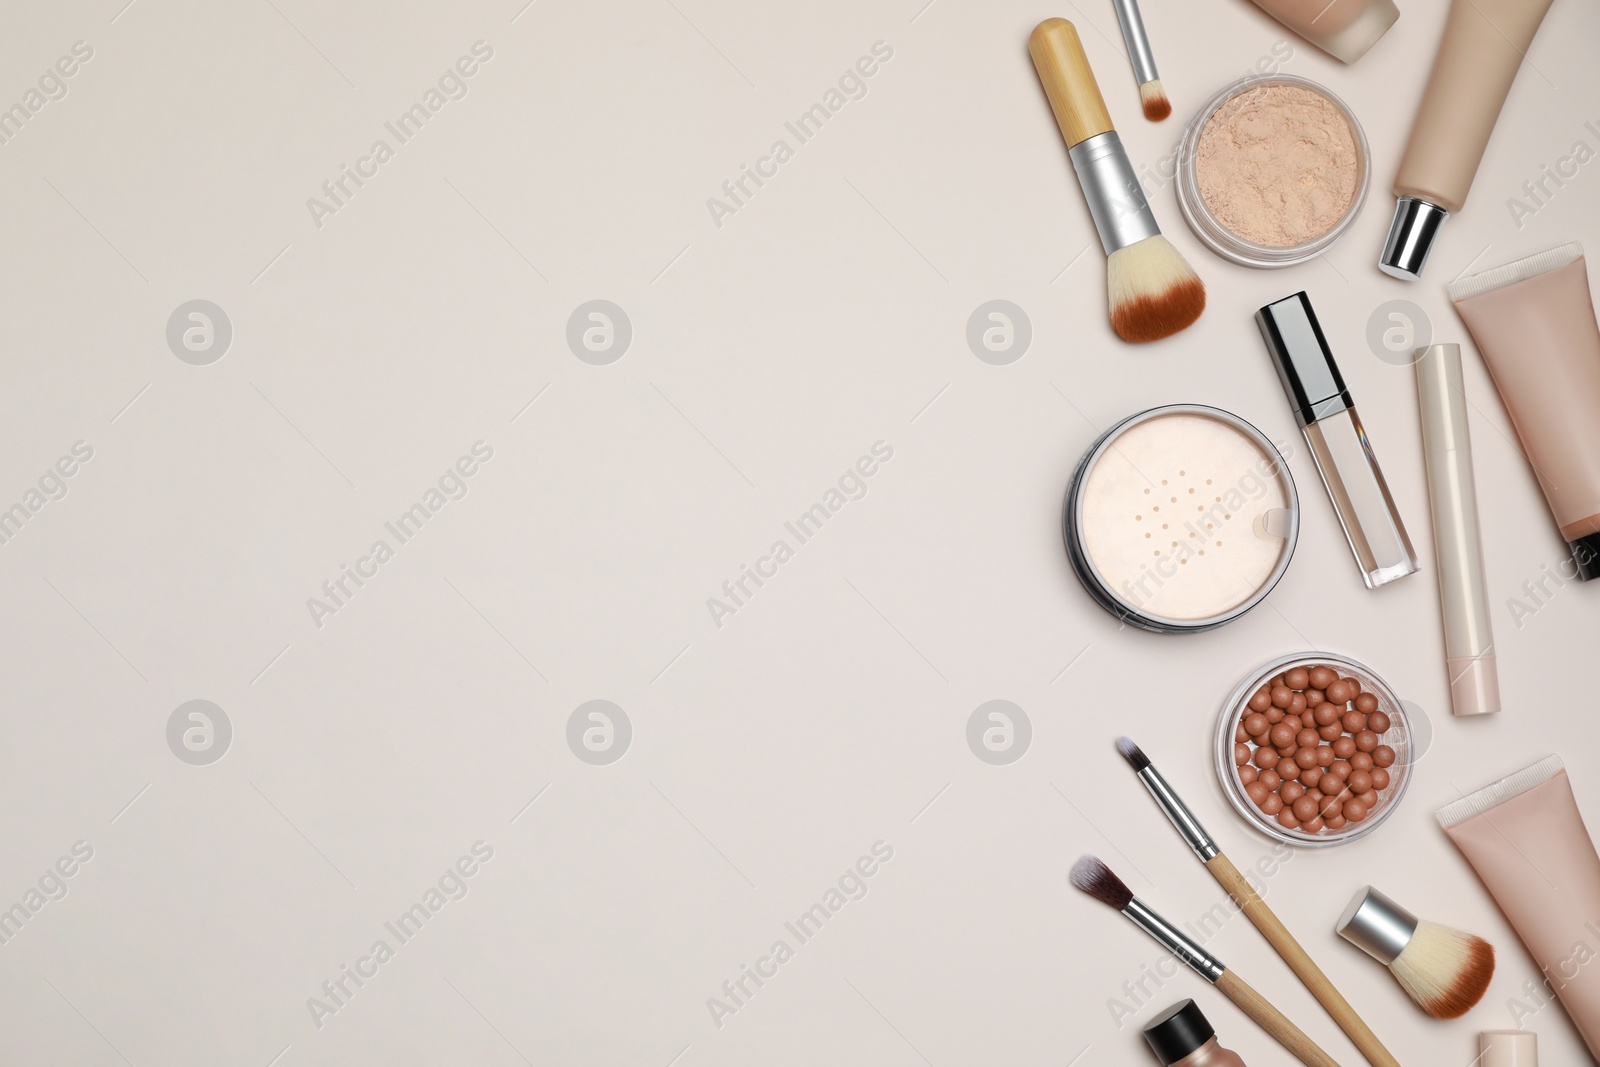 Photo of Face powders and other makeup products on beige background, flat lay. Space for text